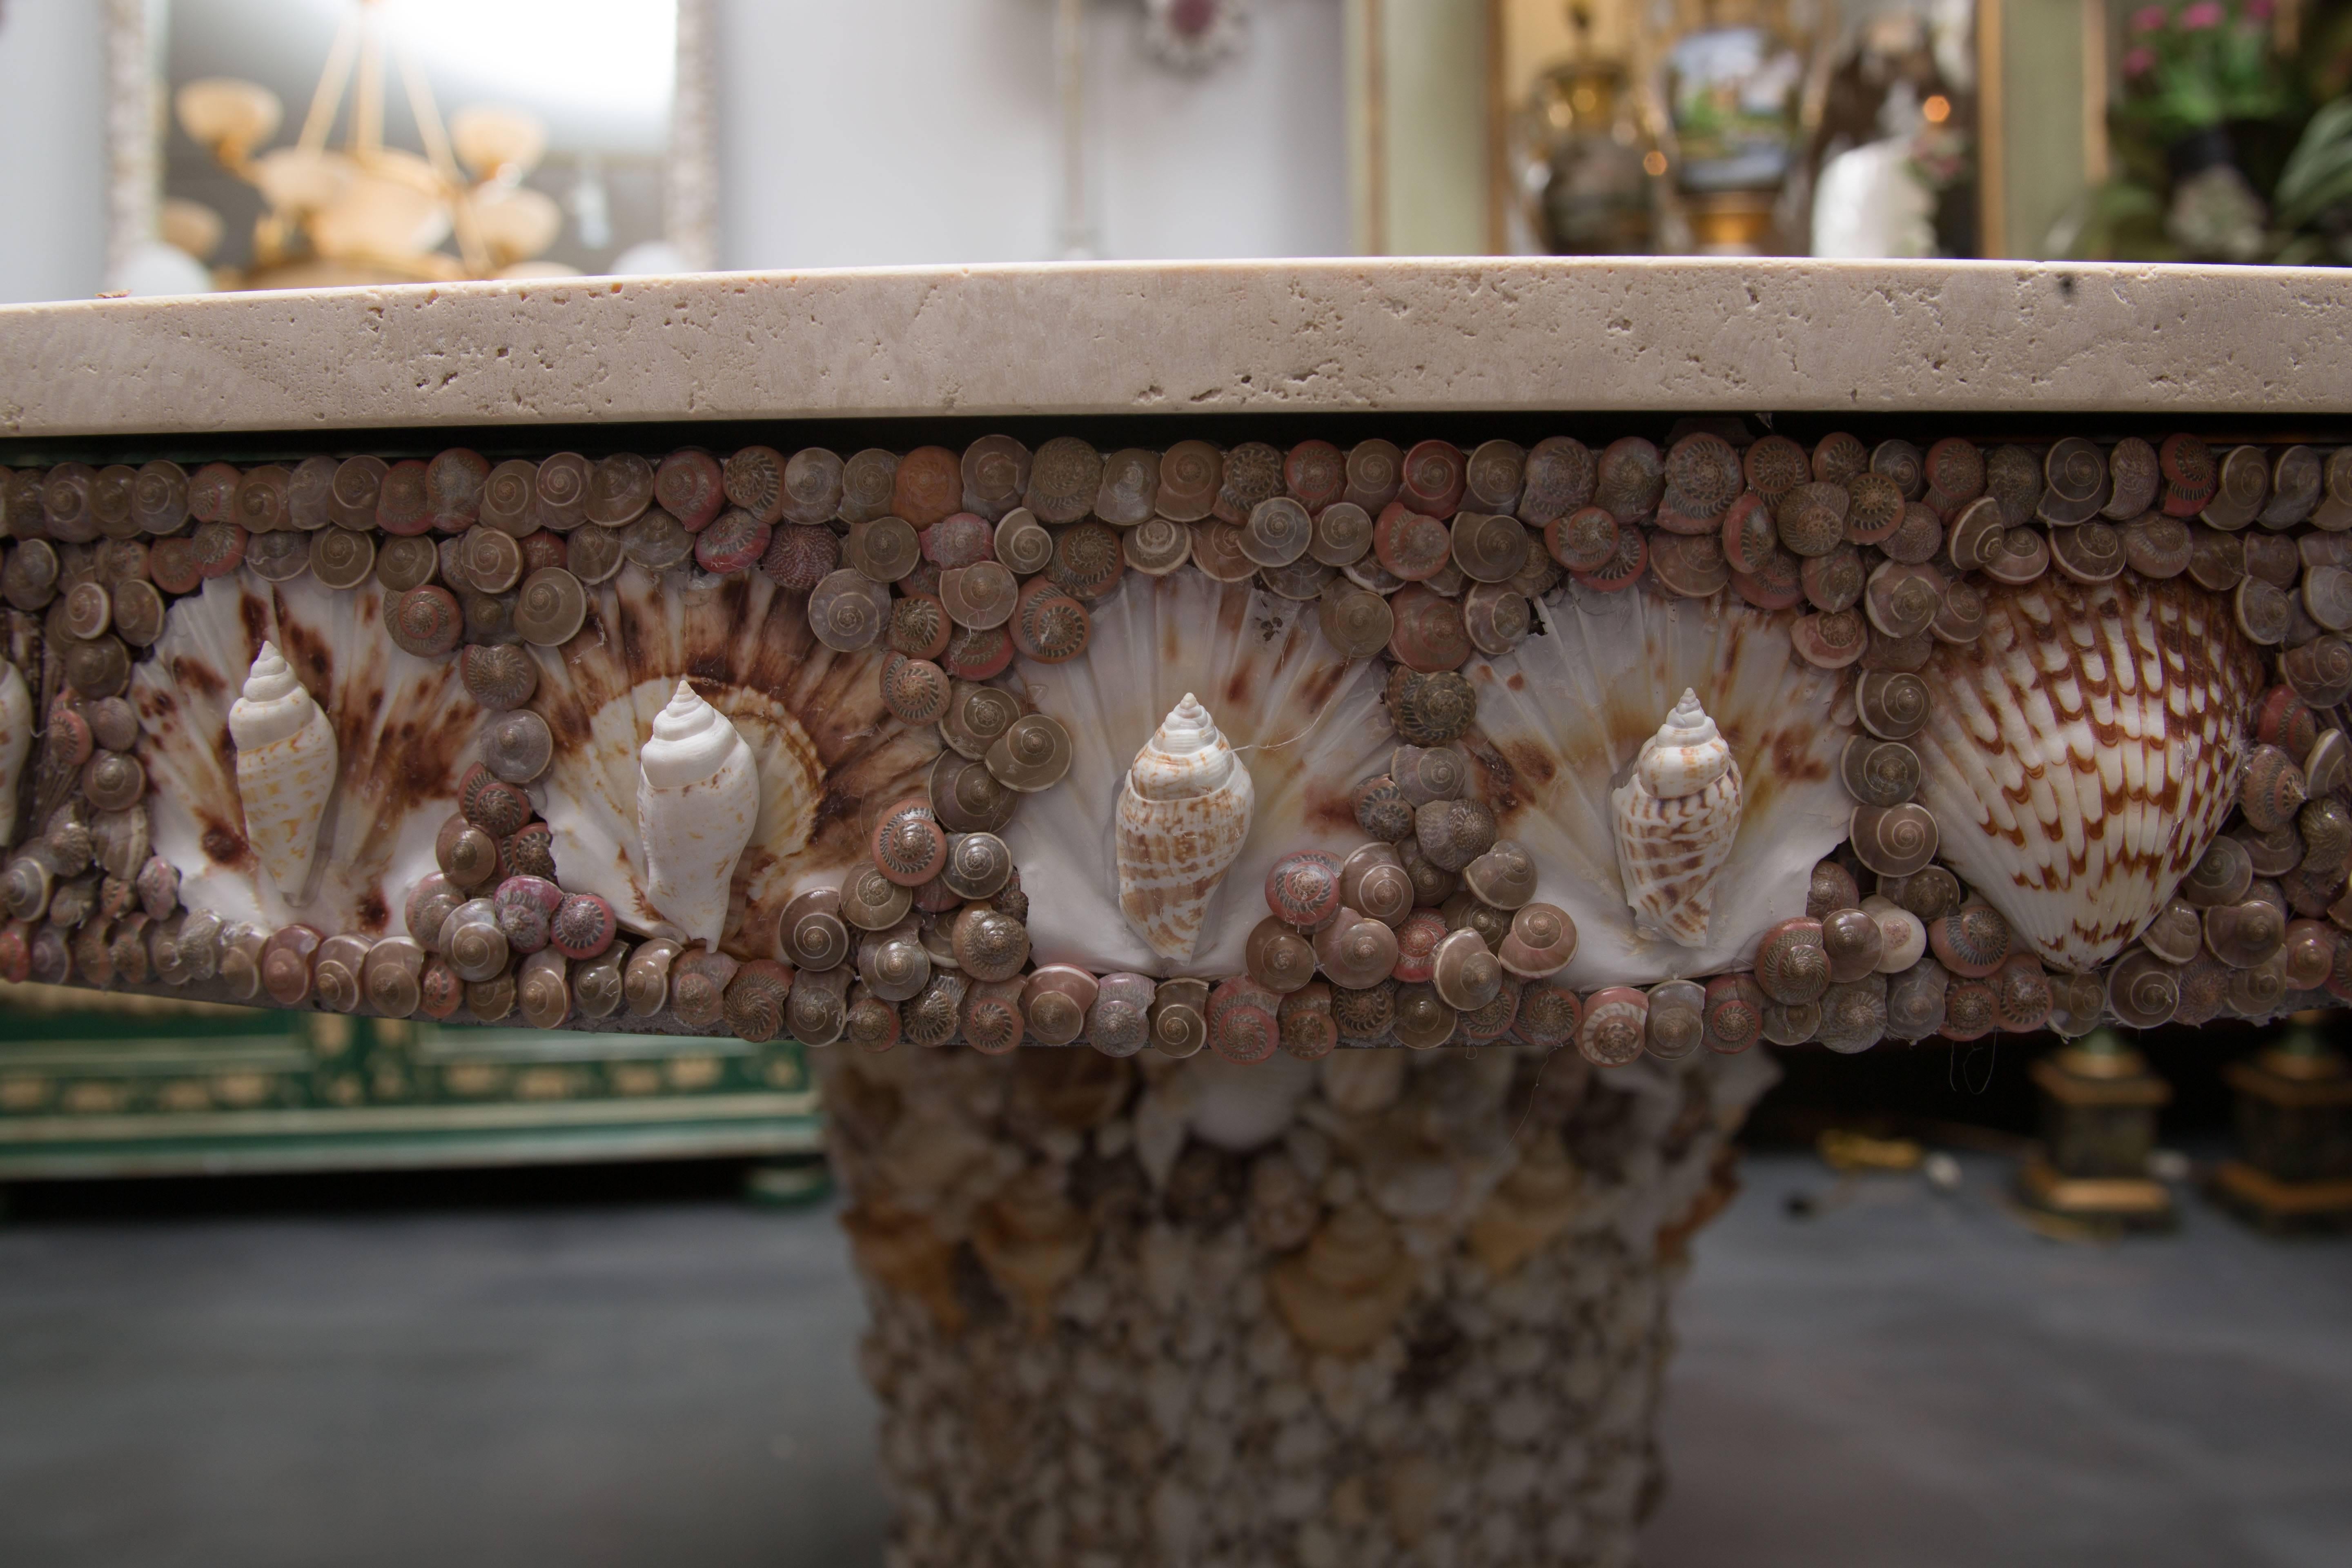 This magnificent centre table is encrusted with a variety of sea shells, offering a stunning alternative to a conventional centre table. The natural unfinished travertine top beautifully complements the natural shell Formations, circa 20th century.